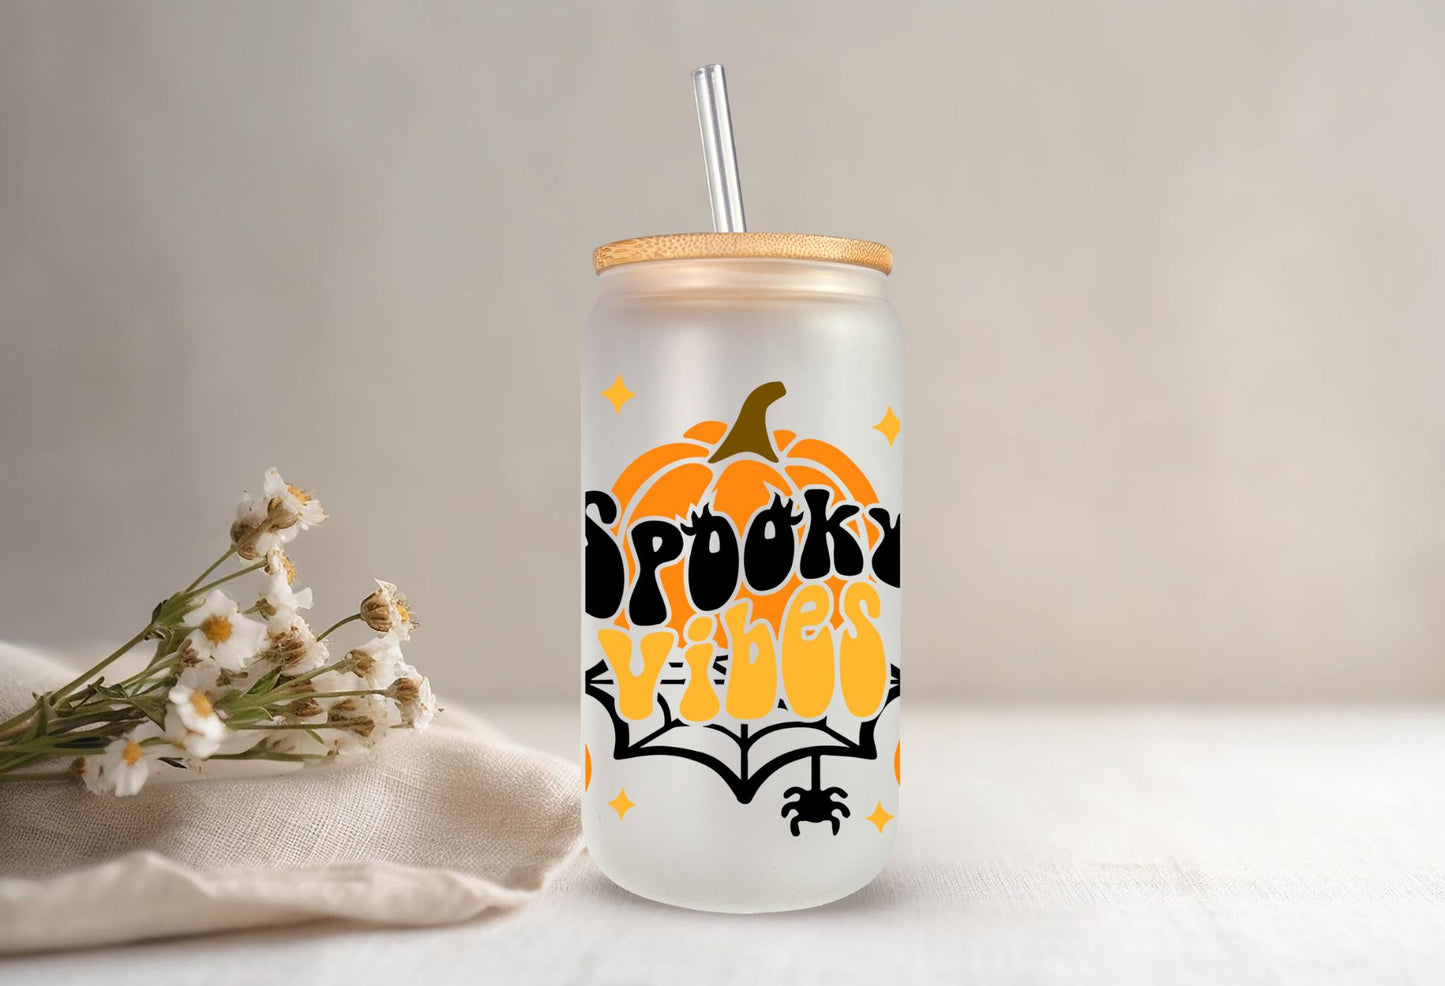 Celebrate this Halloween with Our "Spooky VIbes" 16 oz Frosted Beer Can Glass! l Libbey Style l Bamboo Lid and straw included